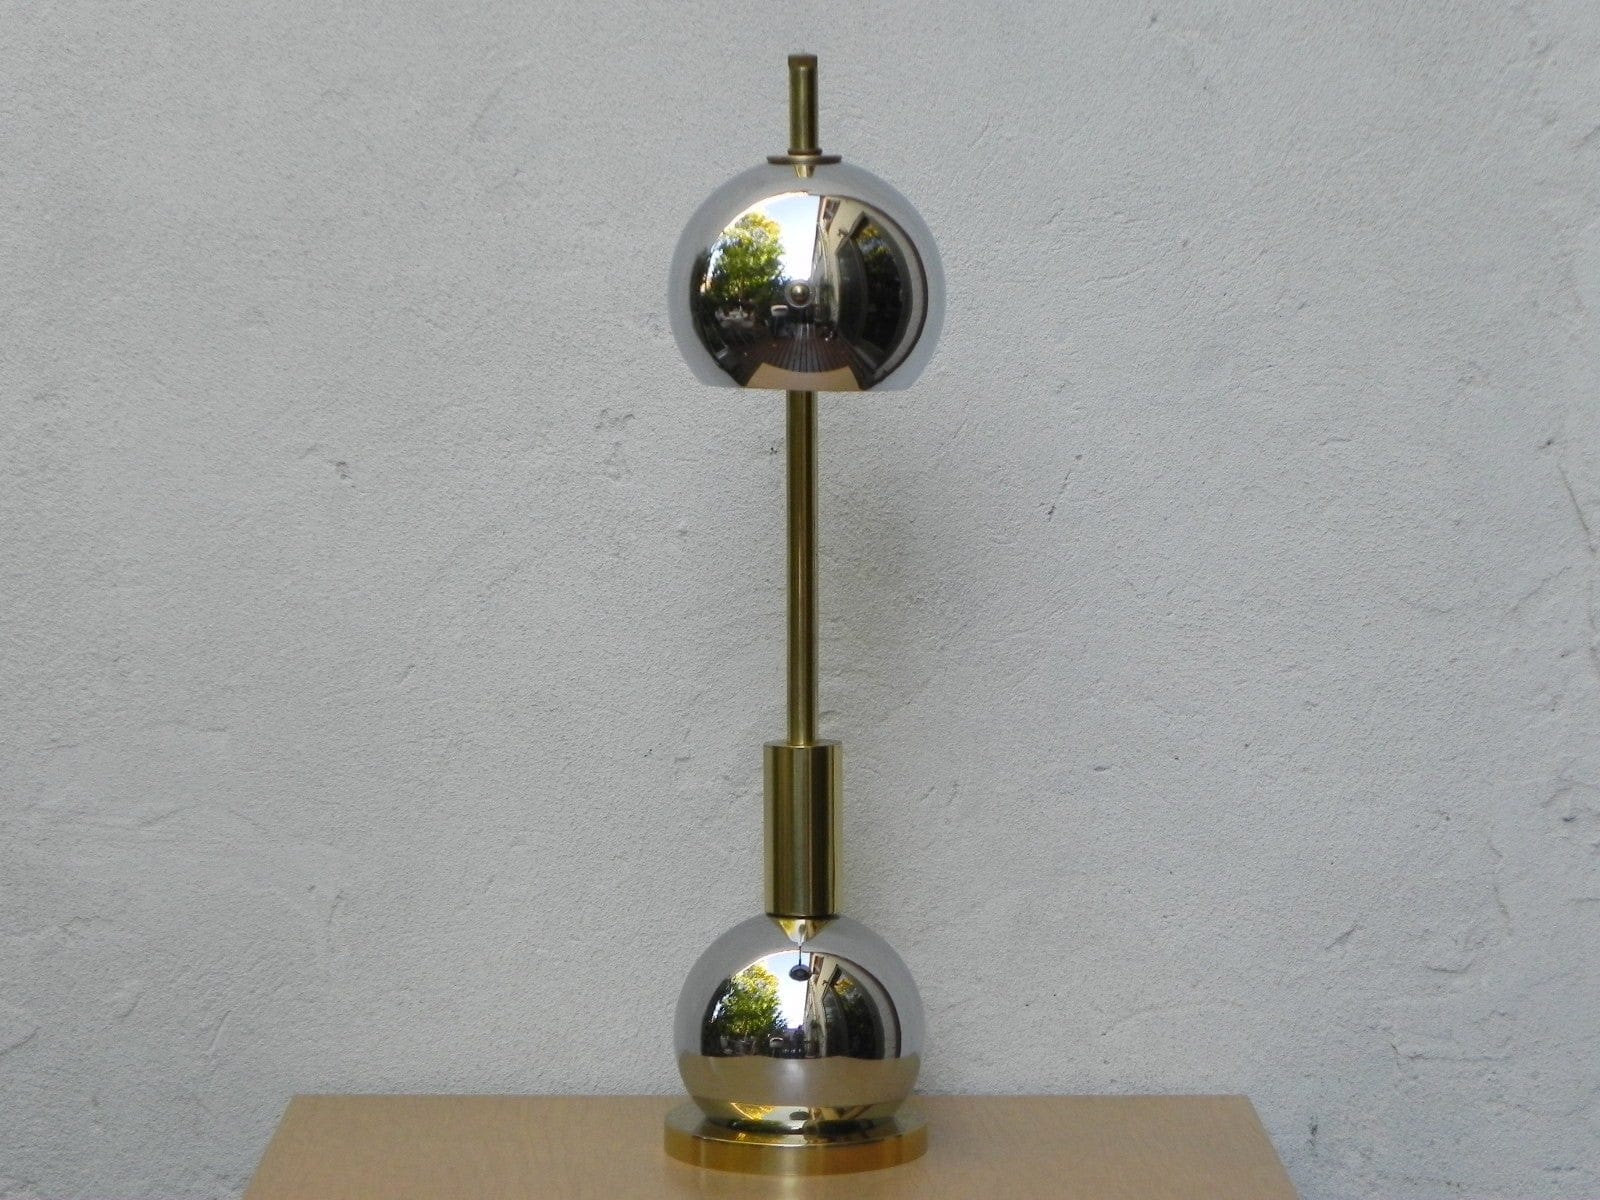 I Like Mike's Mid Century Modern lighting Chrome Ball & Brass Desk Lamp, Re-Crafted